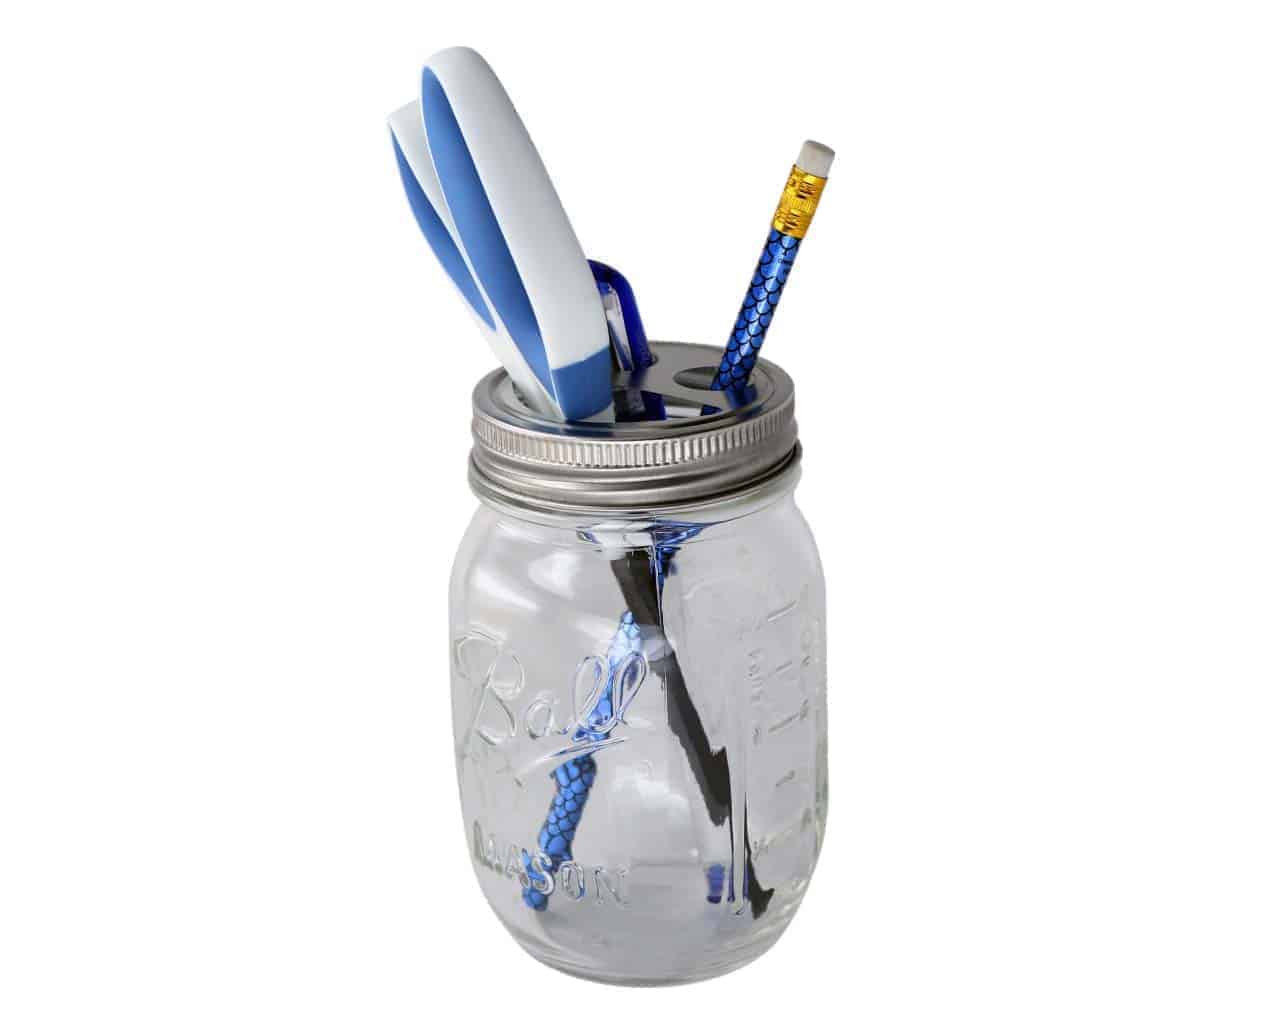 Toothbrush holder lid on regular mouth Ball pint jar with pen, pencil, and scissors